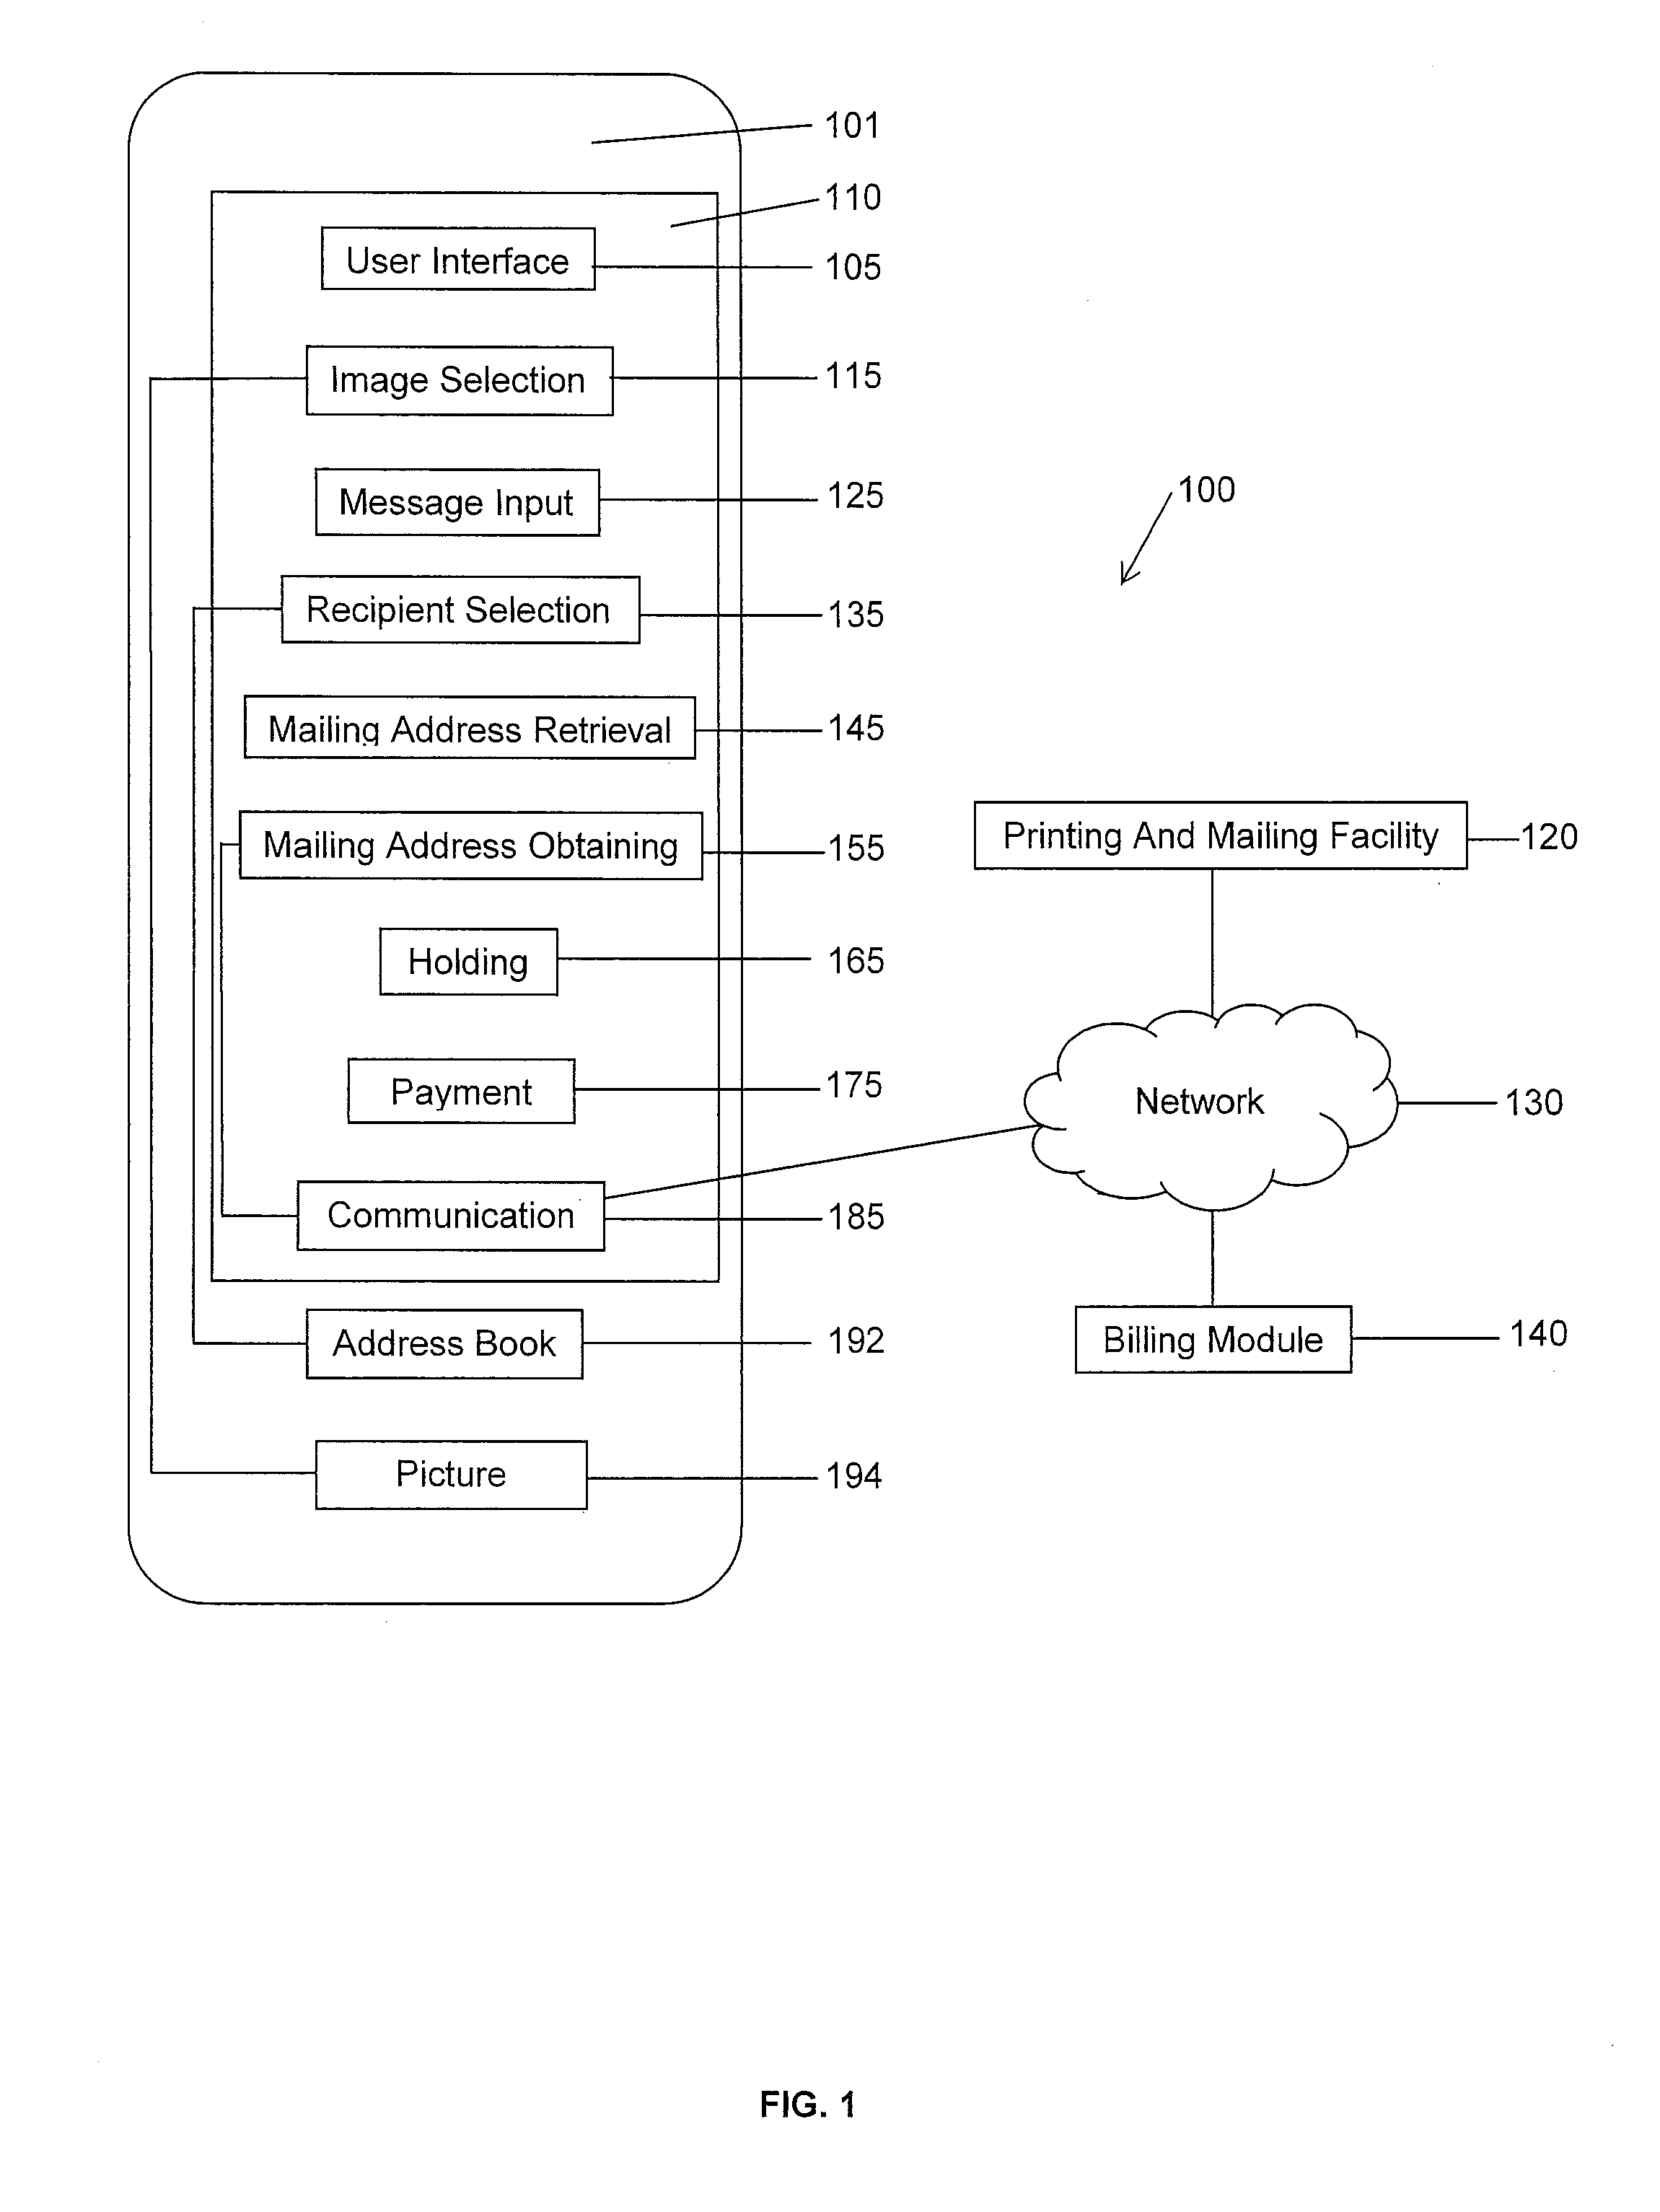 Mobile phone application, system, and method for sending postcards and obtaining mailing addresses